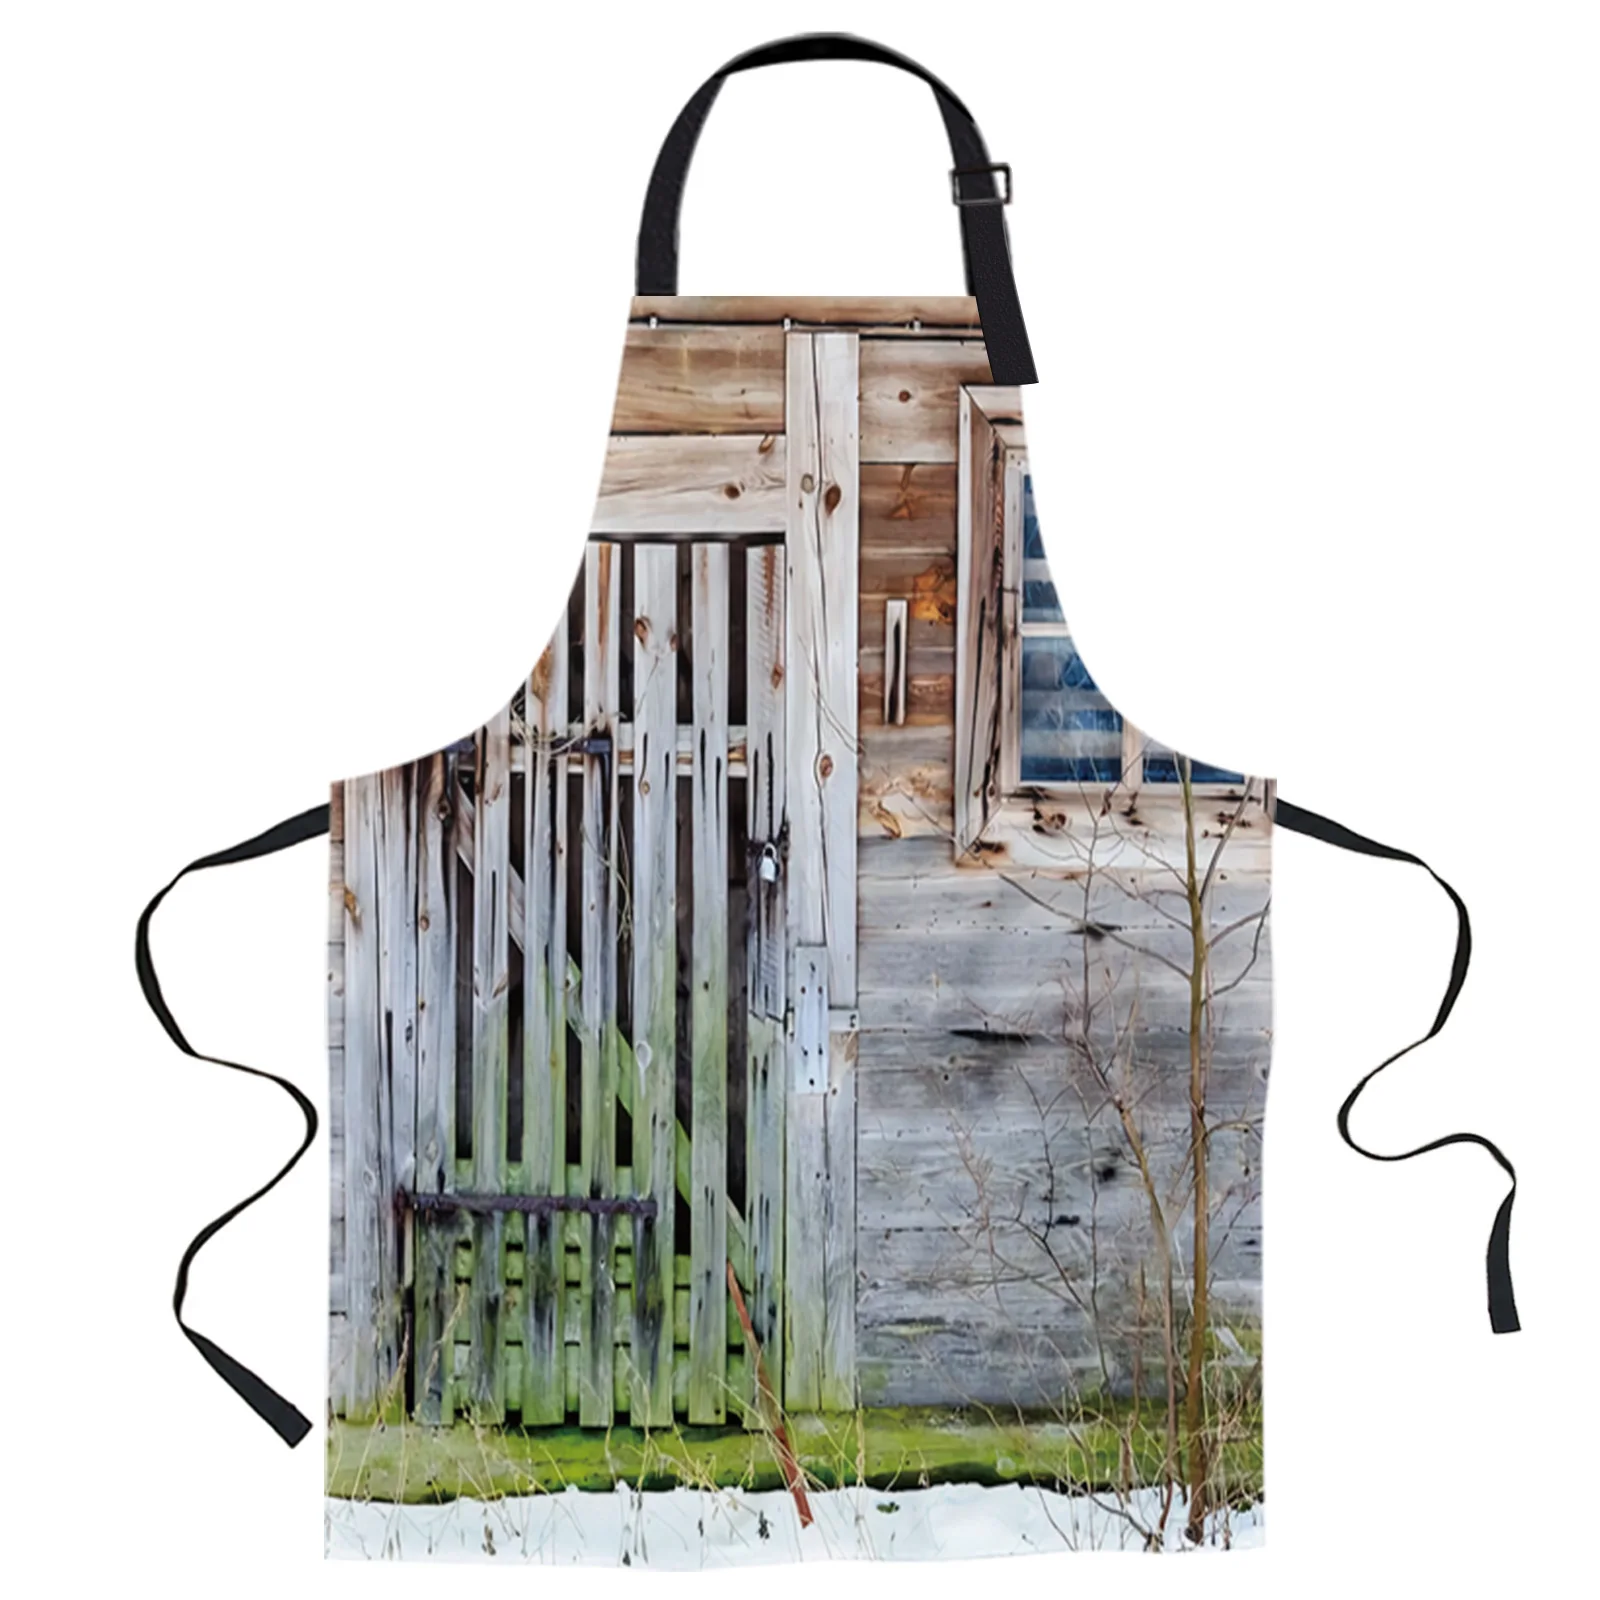 

Wooden Door Moss Barn Farm Apron Woman Adult Bibs Home Cooking Baking Coffee Shop Cleaning Canvas Aprons Kitchen Accessory